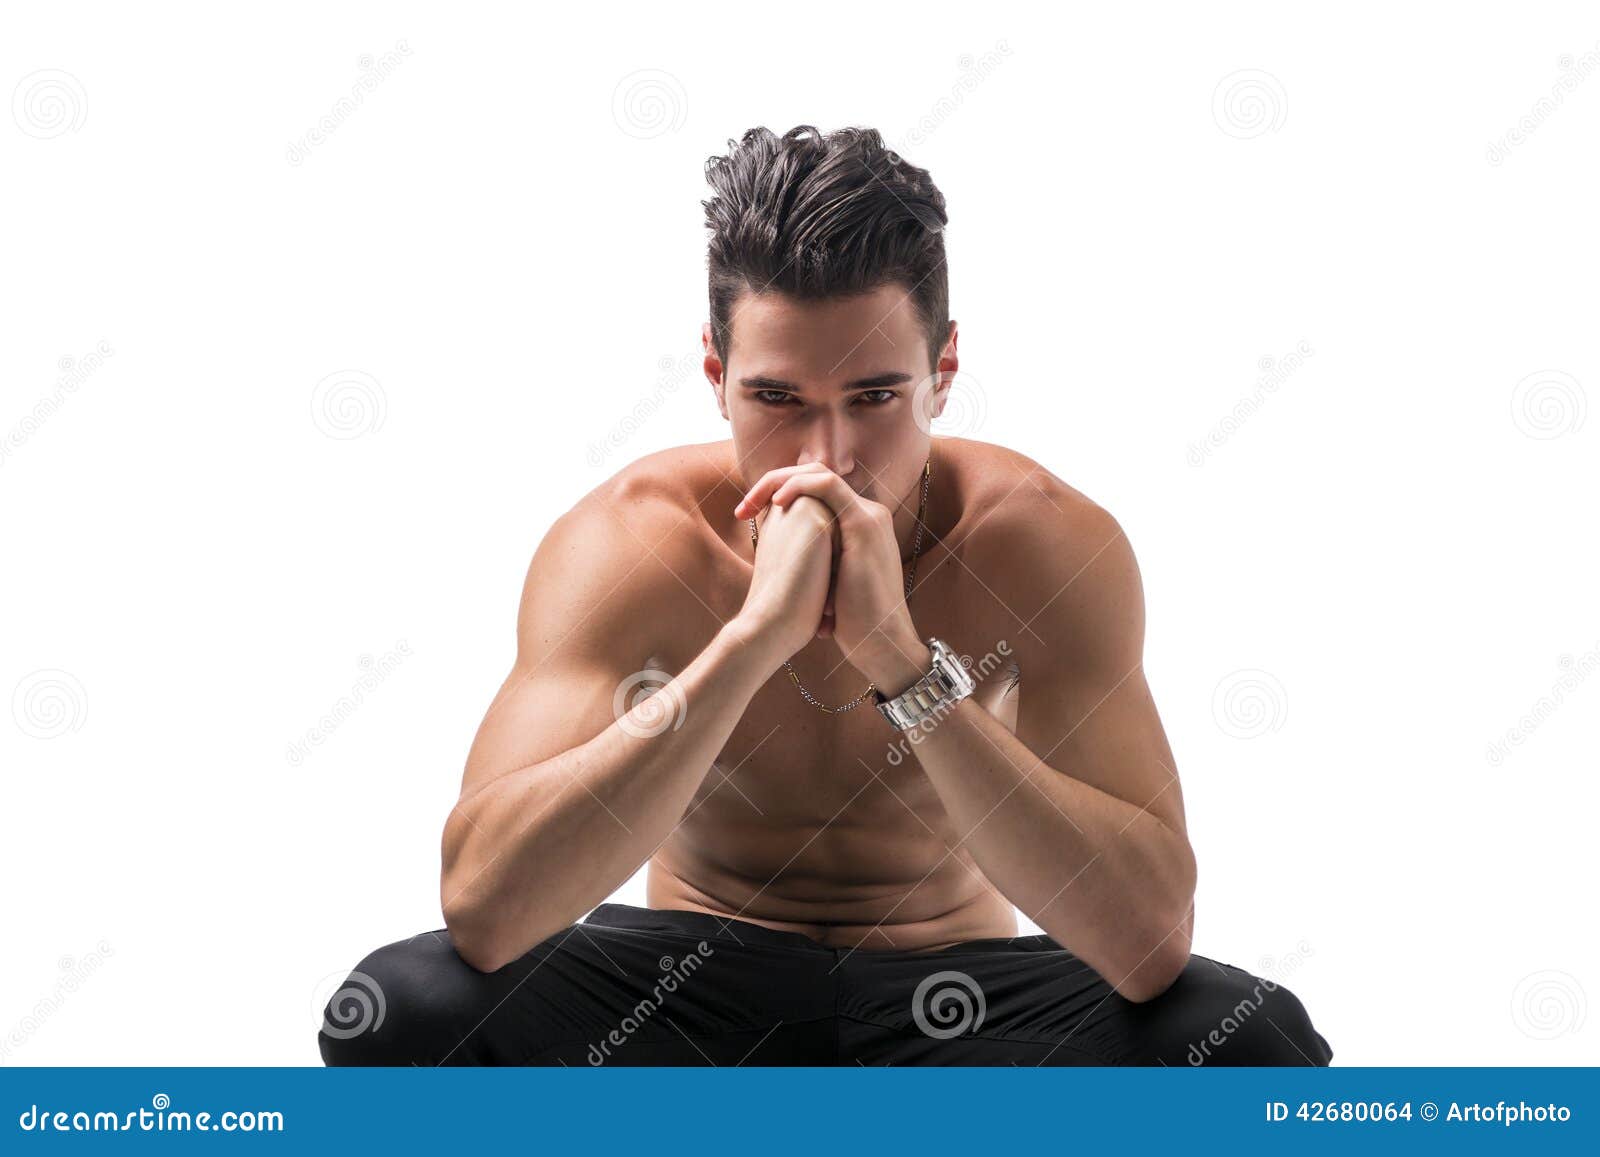 shirtless young man deep in contemplation